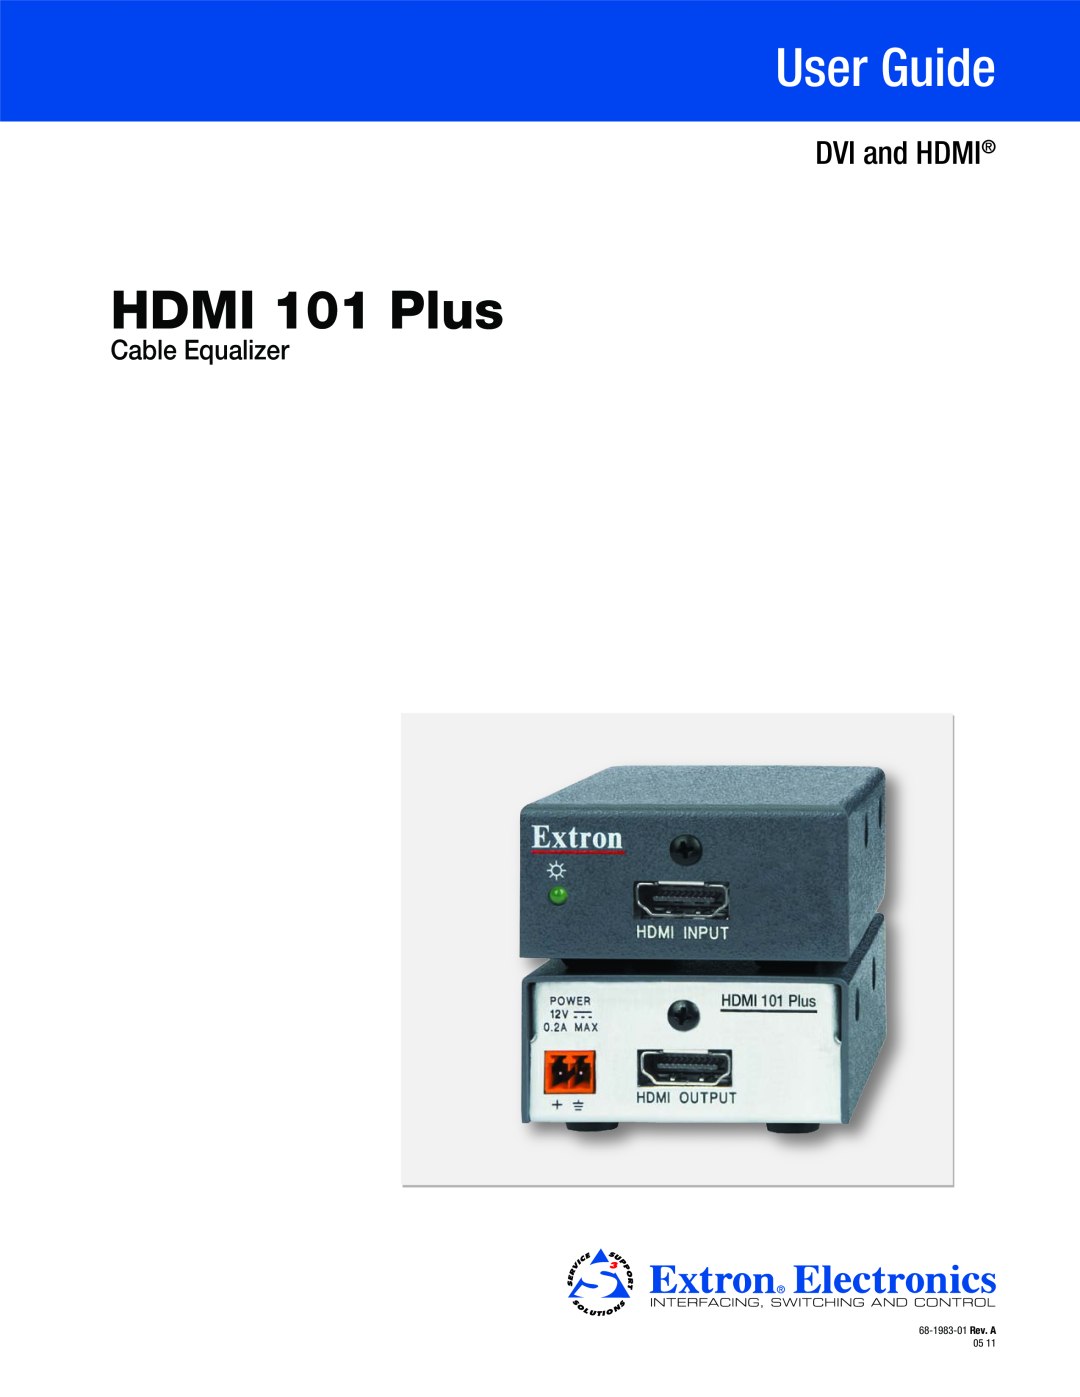 Extron electronic 101 PLUS manual HDMI 101 Plus, User Guide, DVI and HDMI, Cable Equalizer, 68-1983-01Rev. A 05 